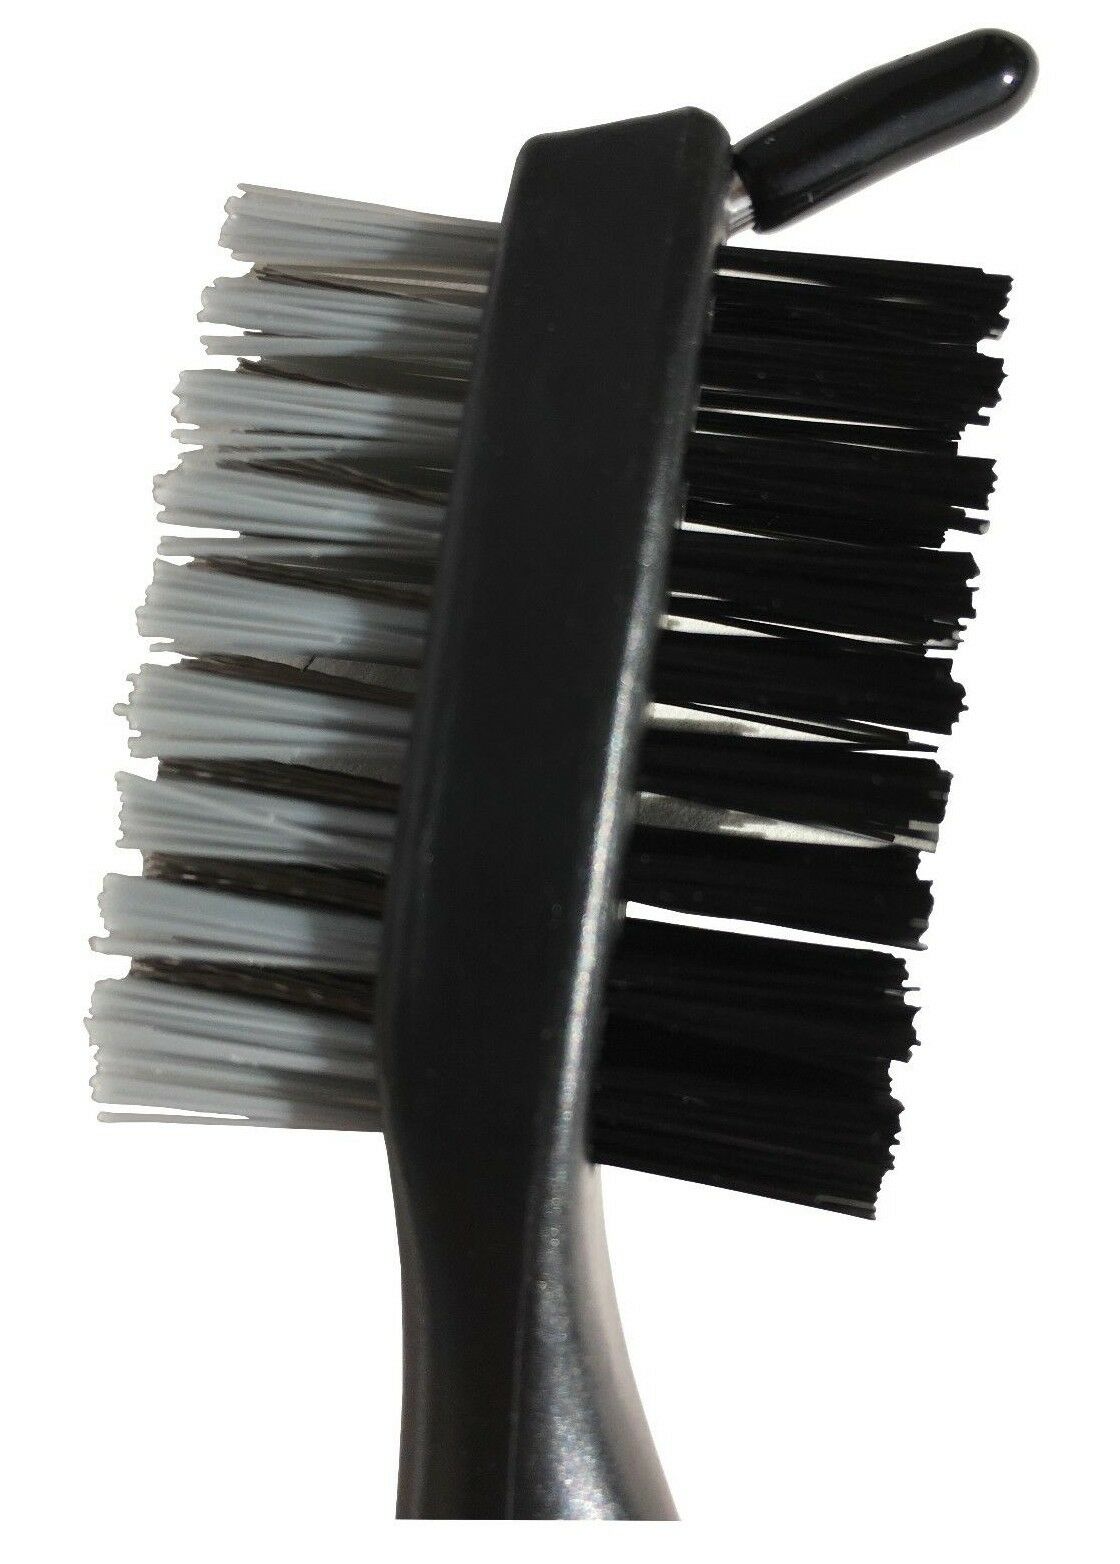 Golf Brushes - Golf Club Cleaning Brush 2 Sided Retractable Tool Club Cleaner ( Black ) - image 2 of 3